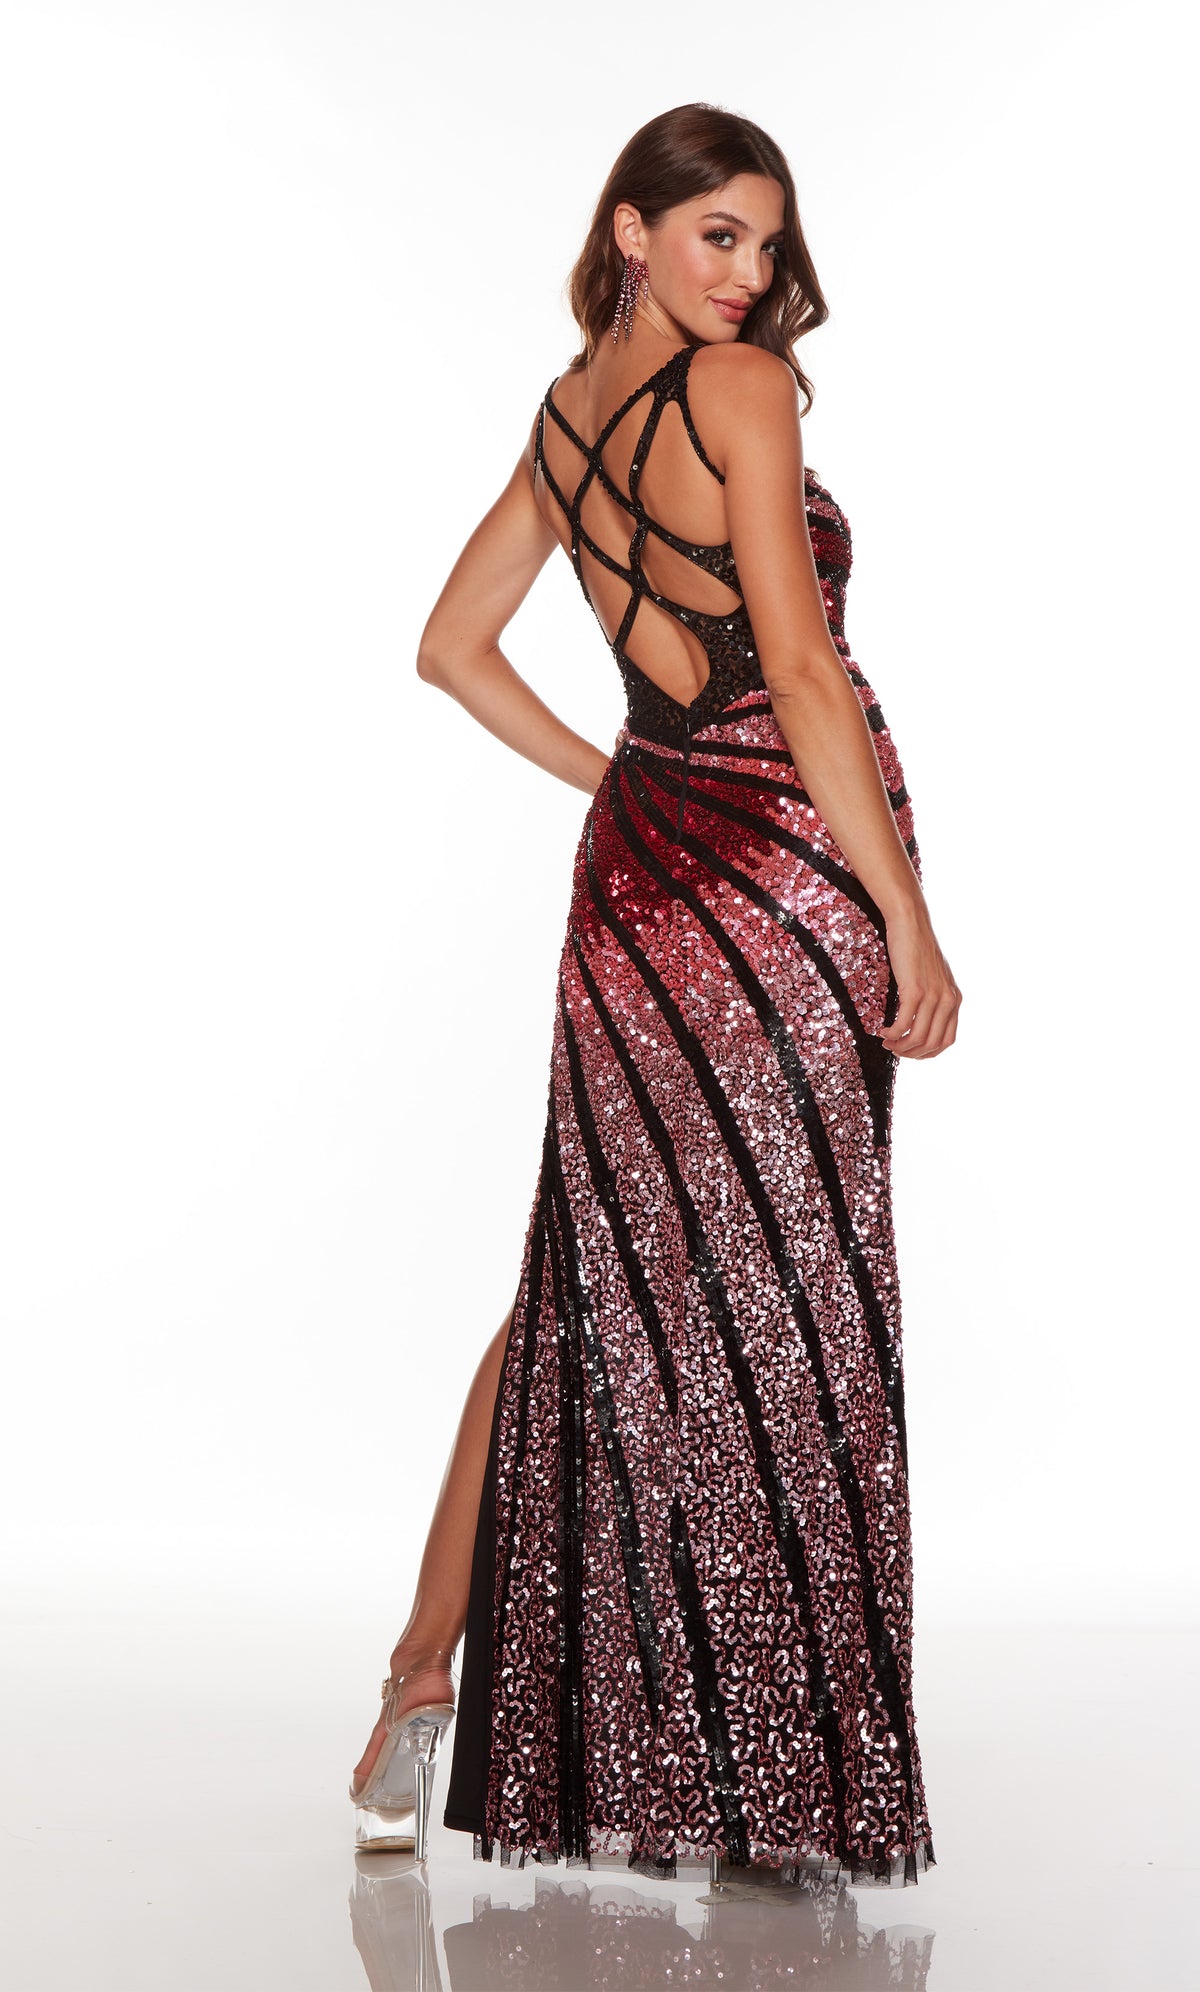 Sparkly prom dress with a cutout back and side slit in black-pink.